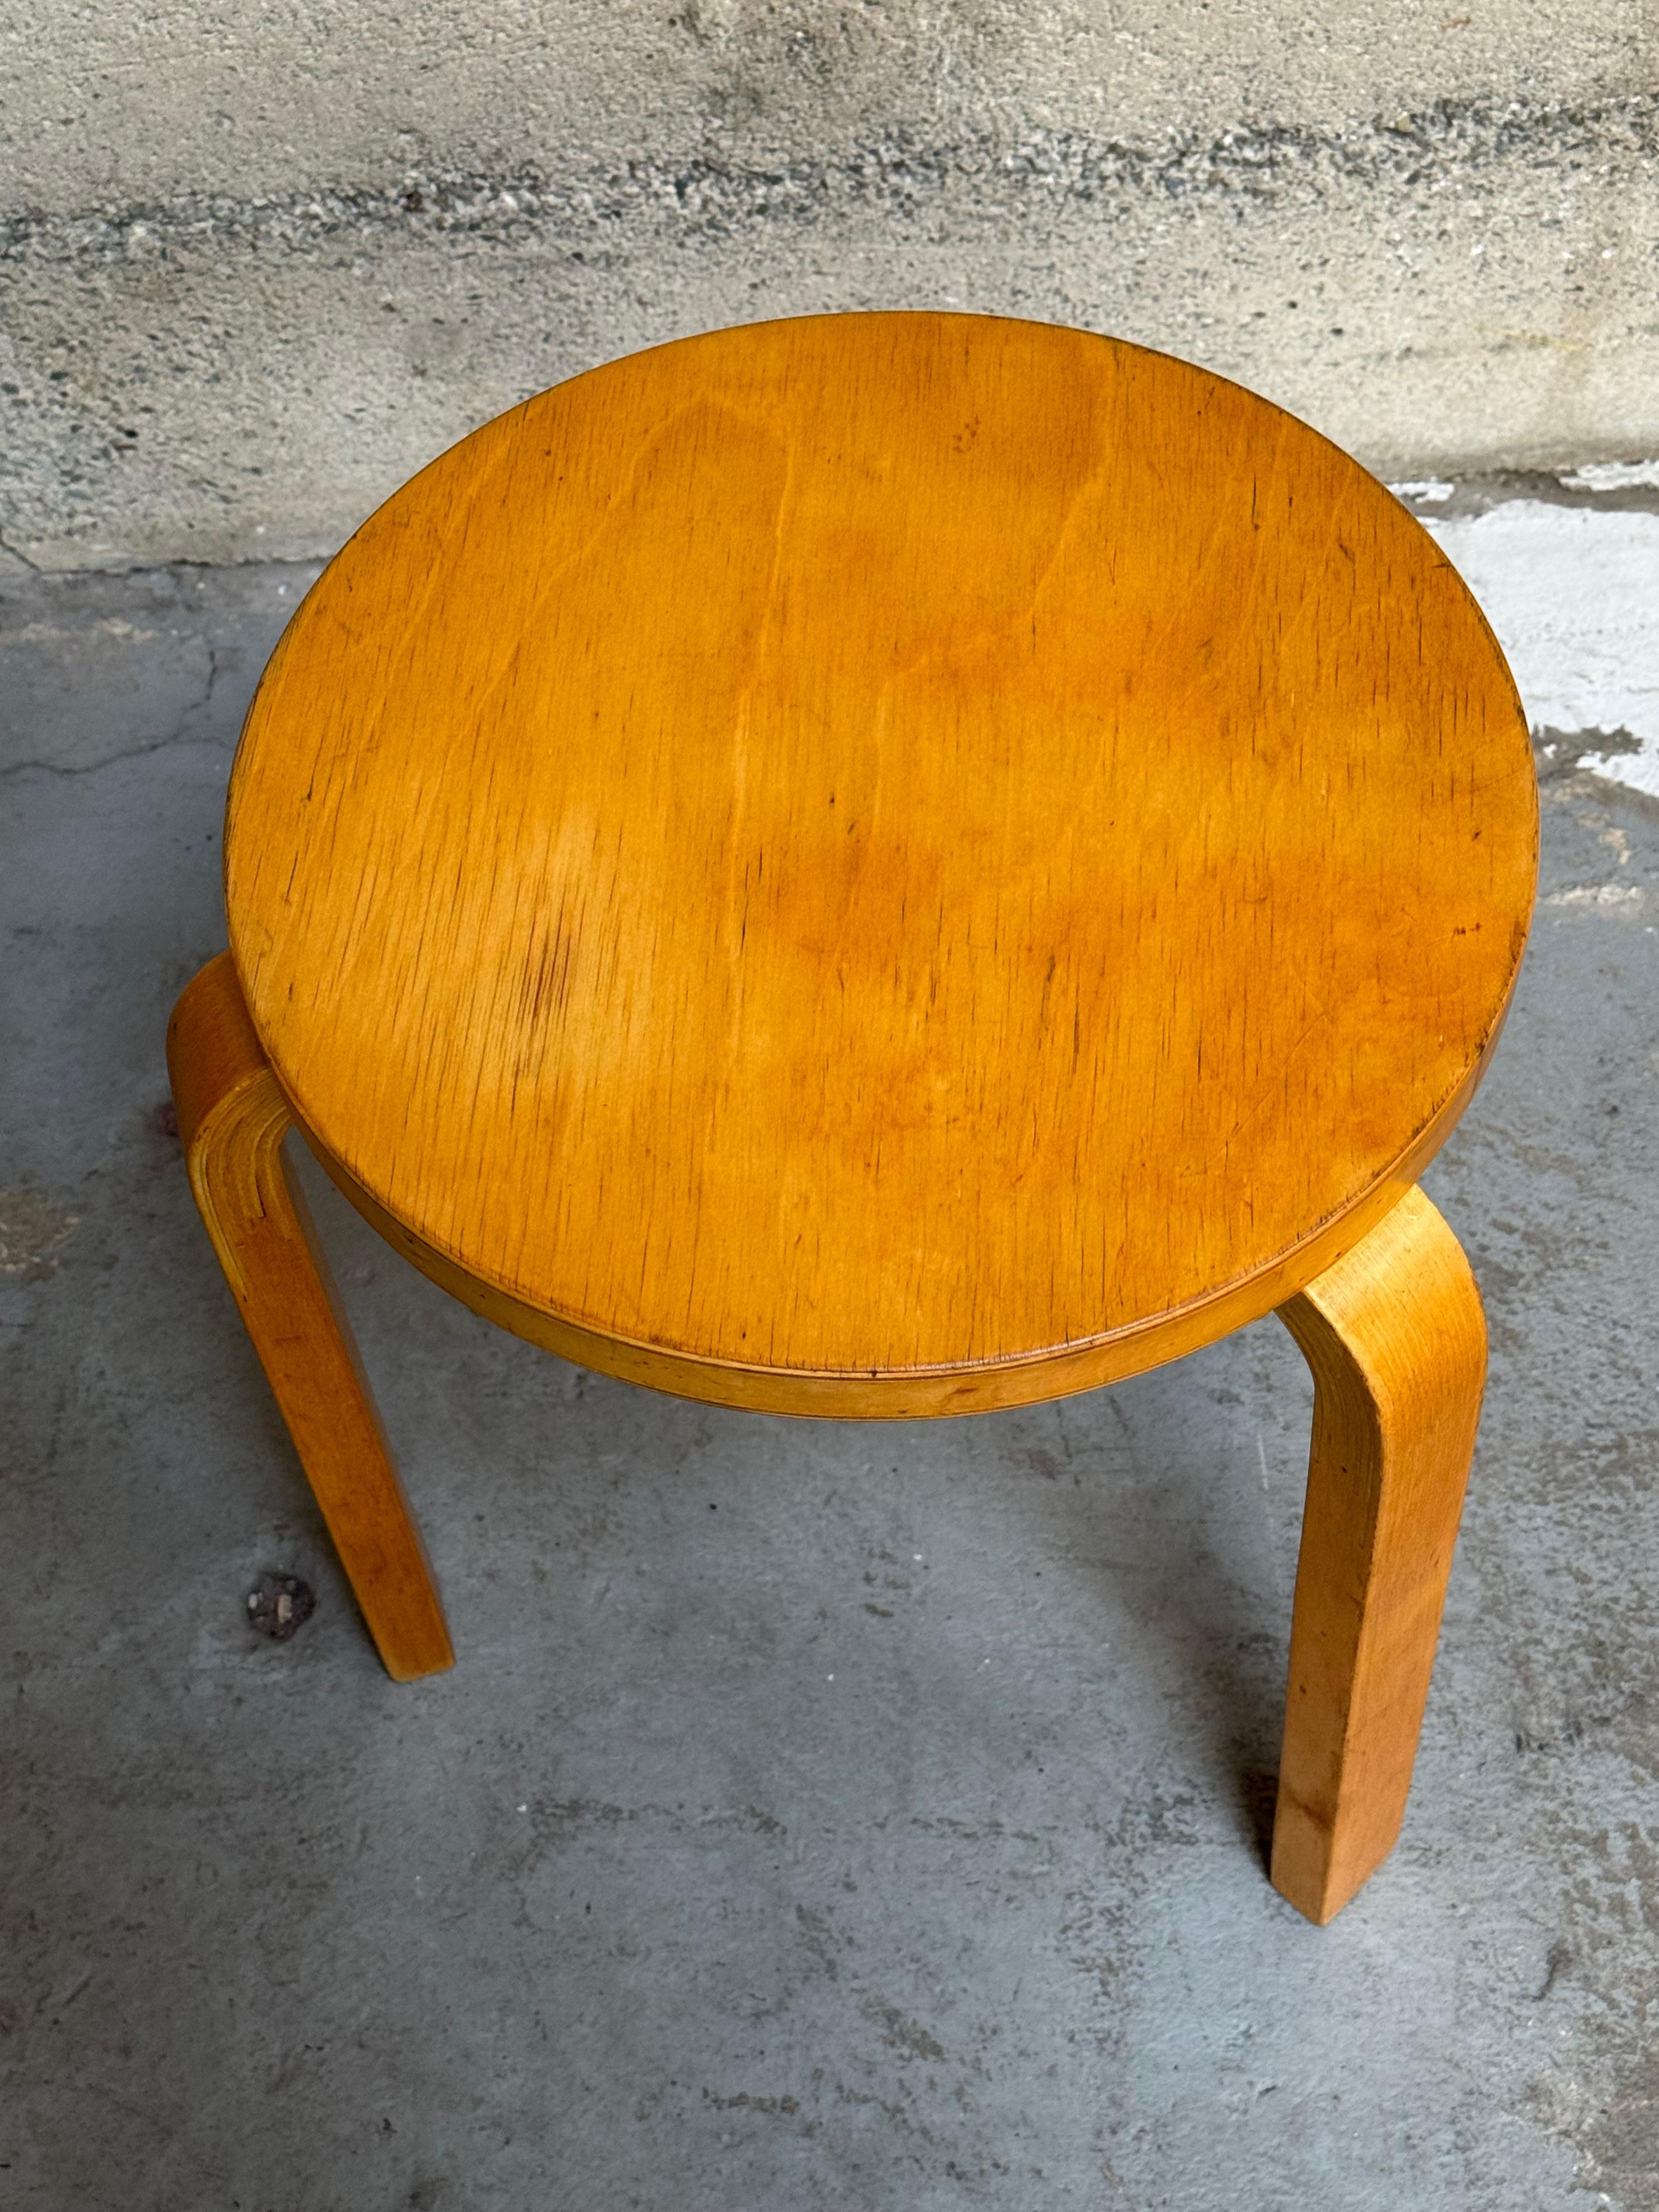 Stack of 4 1950s Alvar Aalto Model 60 Stools In Good Condition For Sale In Oakland, CA